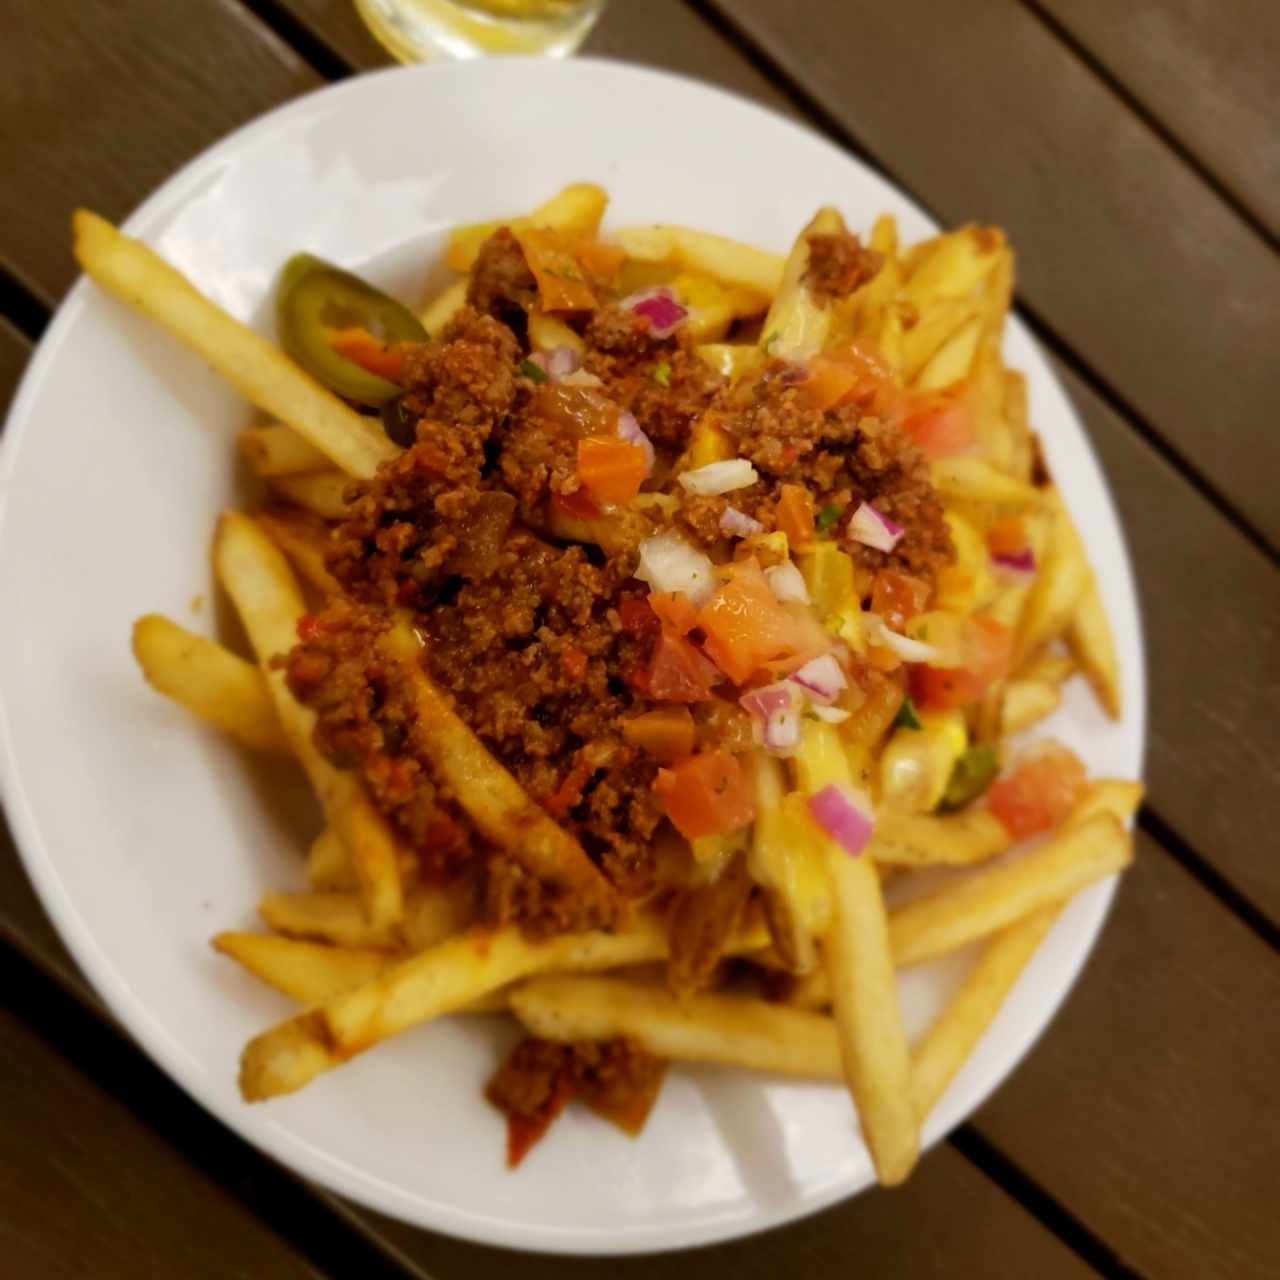 Fries with chili 